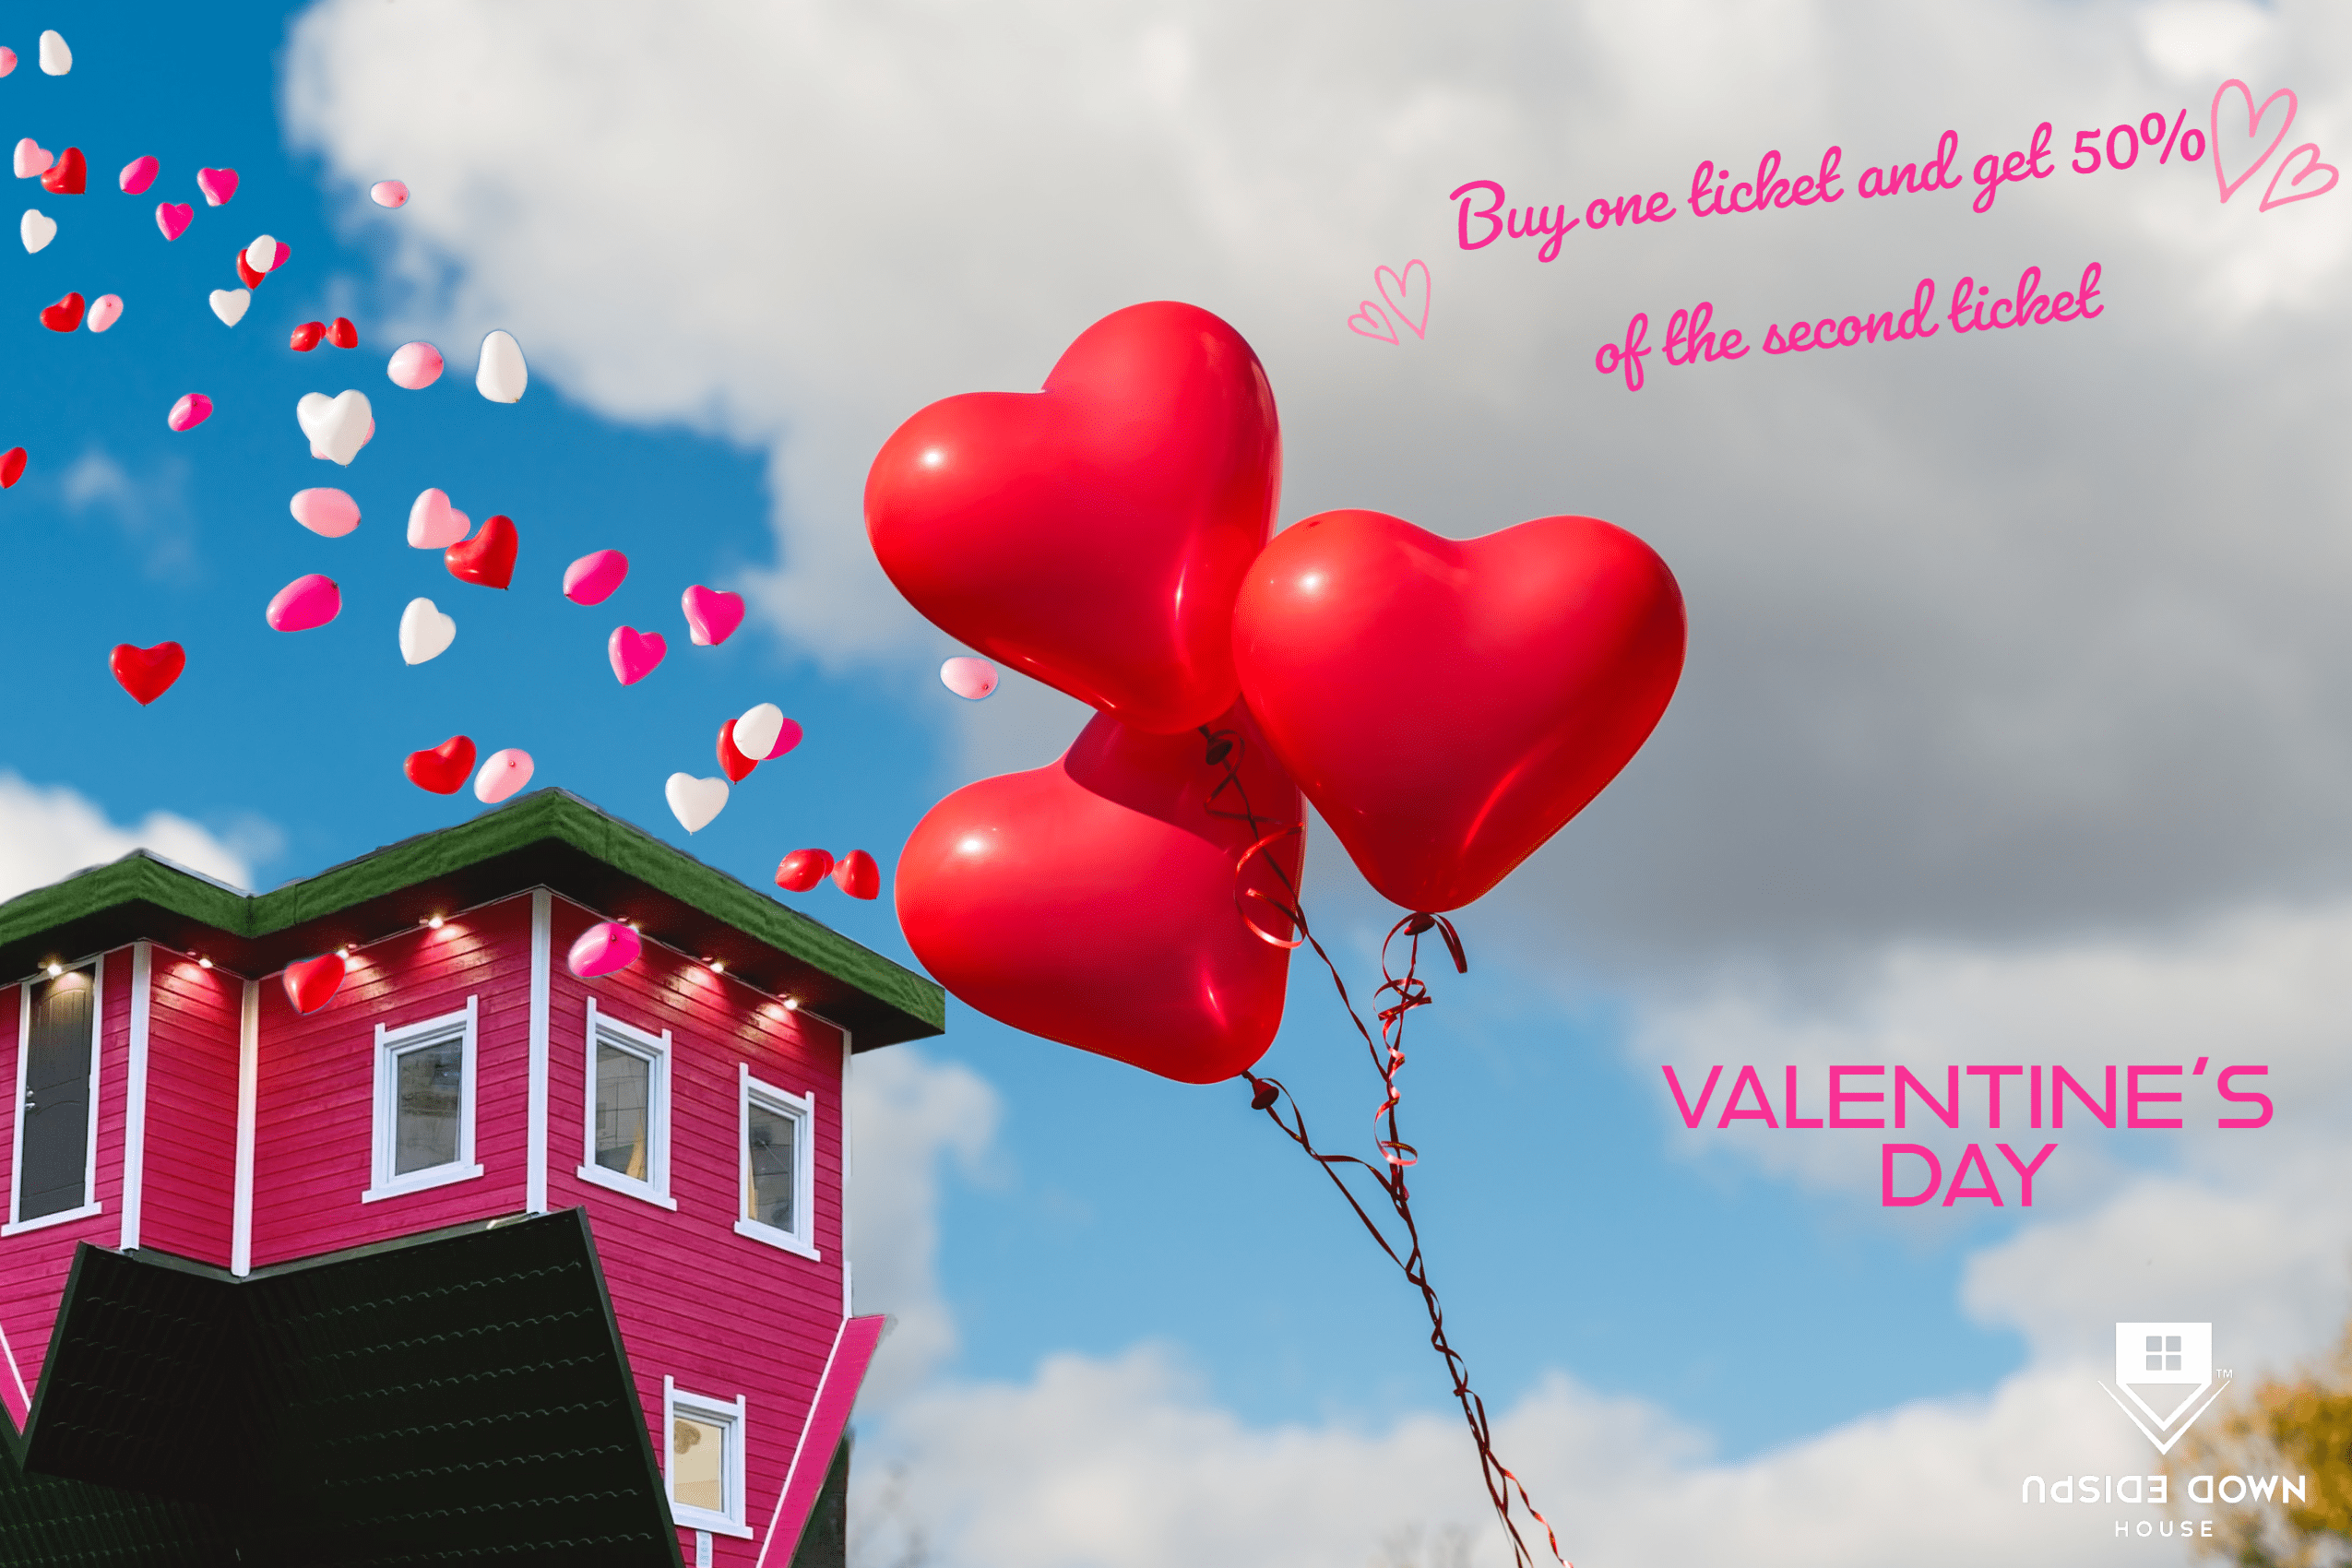 Valentine’s Day at Upside Down House Top Image